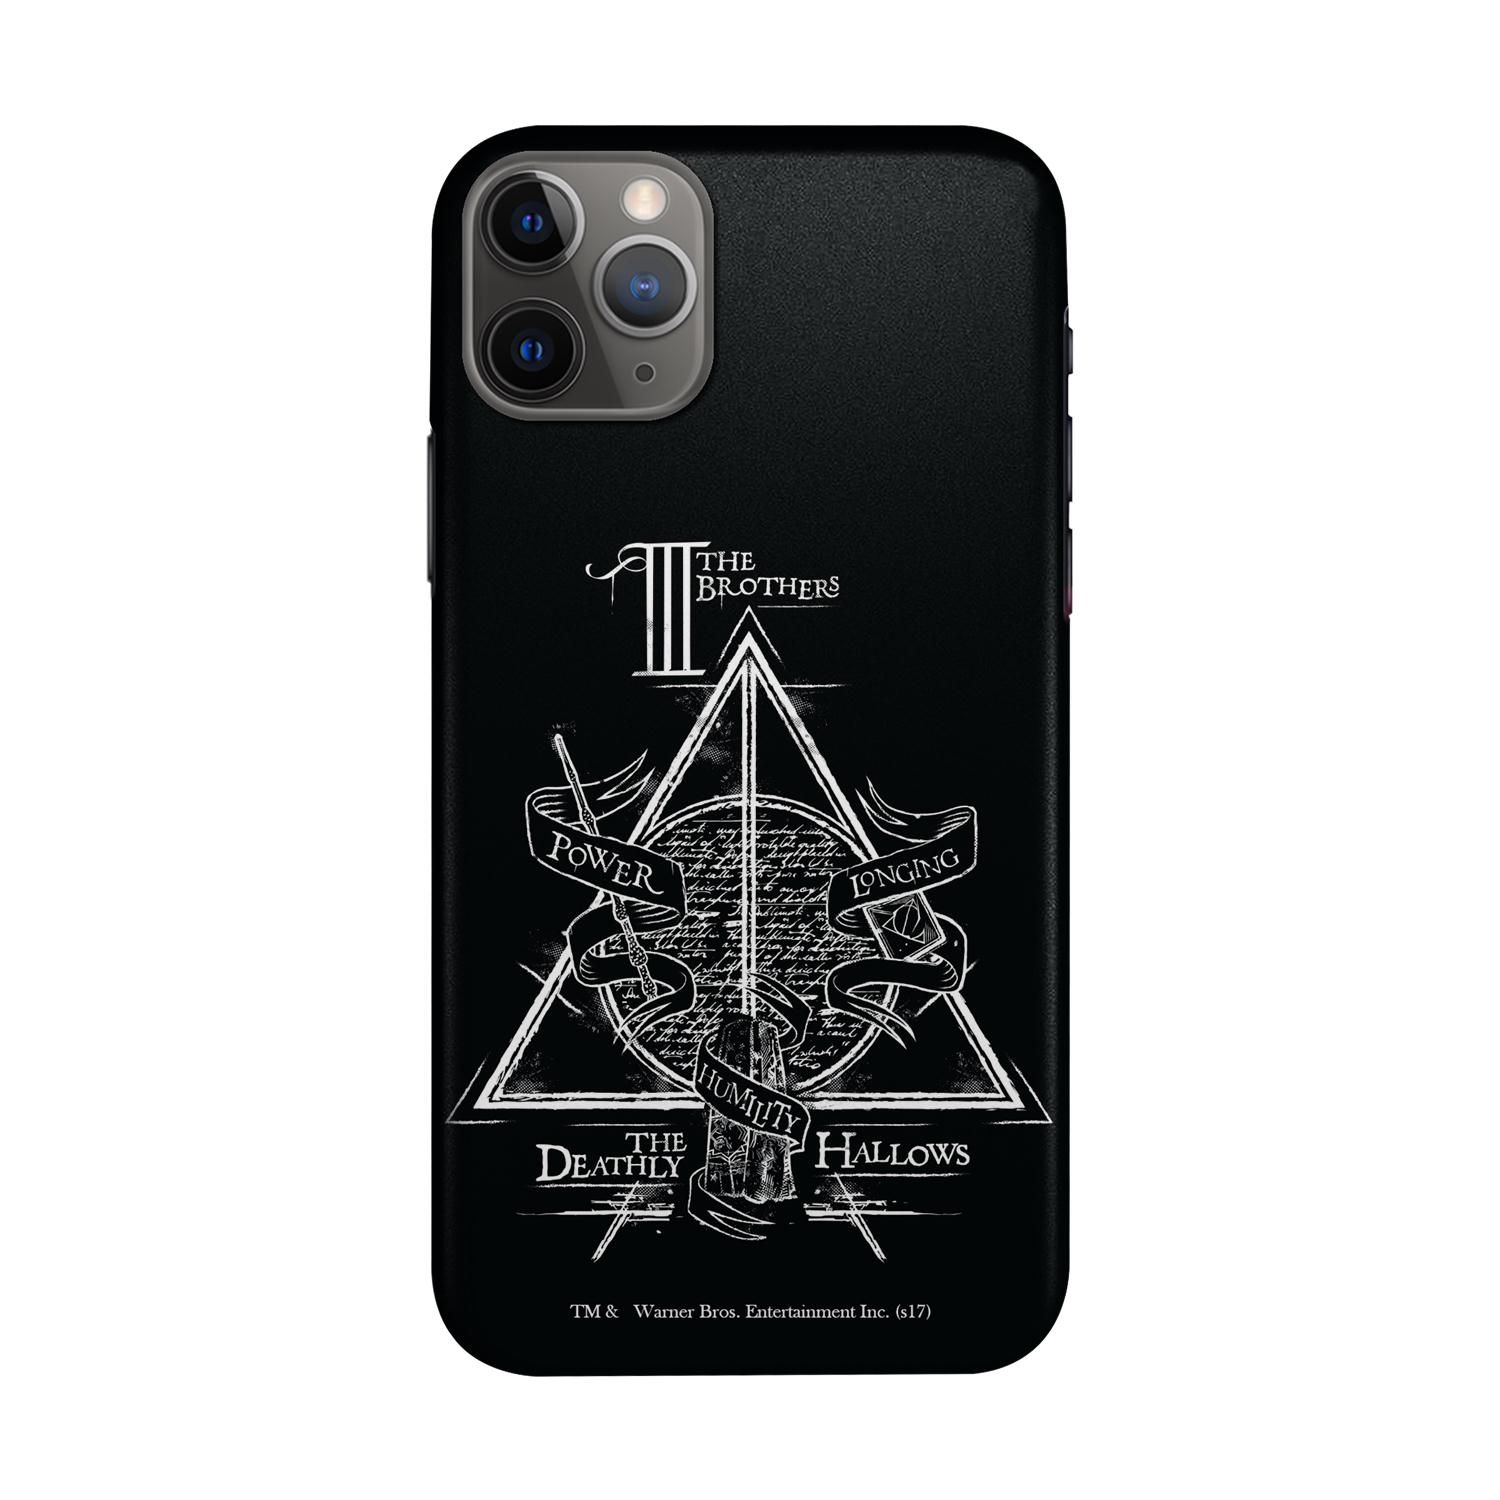 Buy The Deathly Hallows - Sleek Phone Case for iPhone 11 Pro Max Online